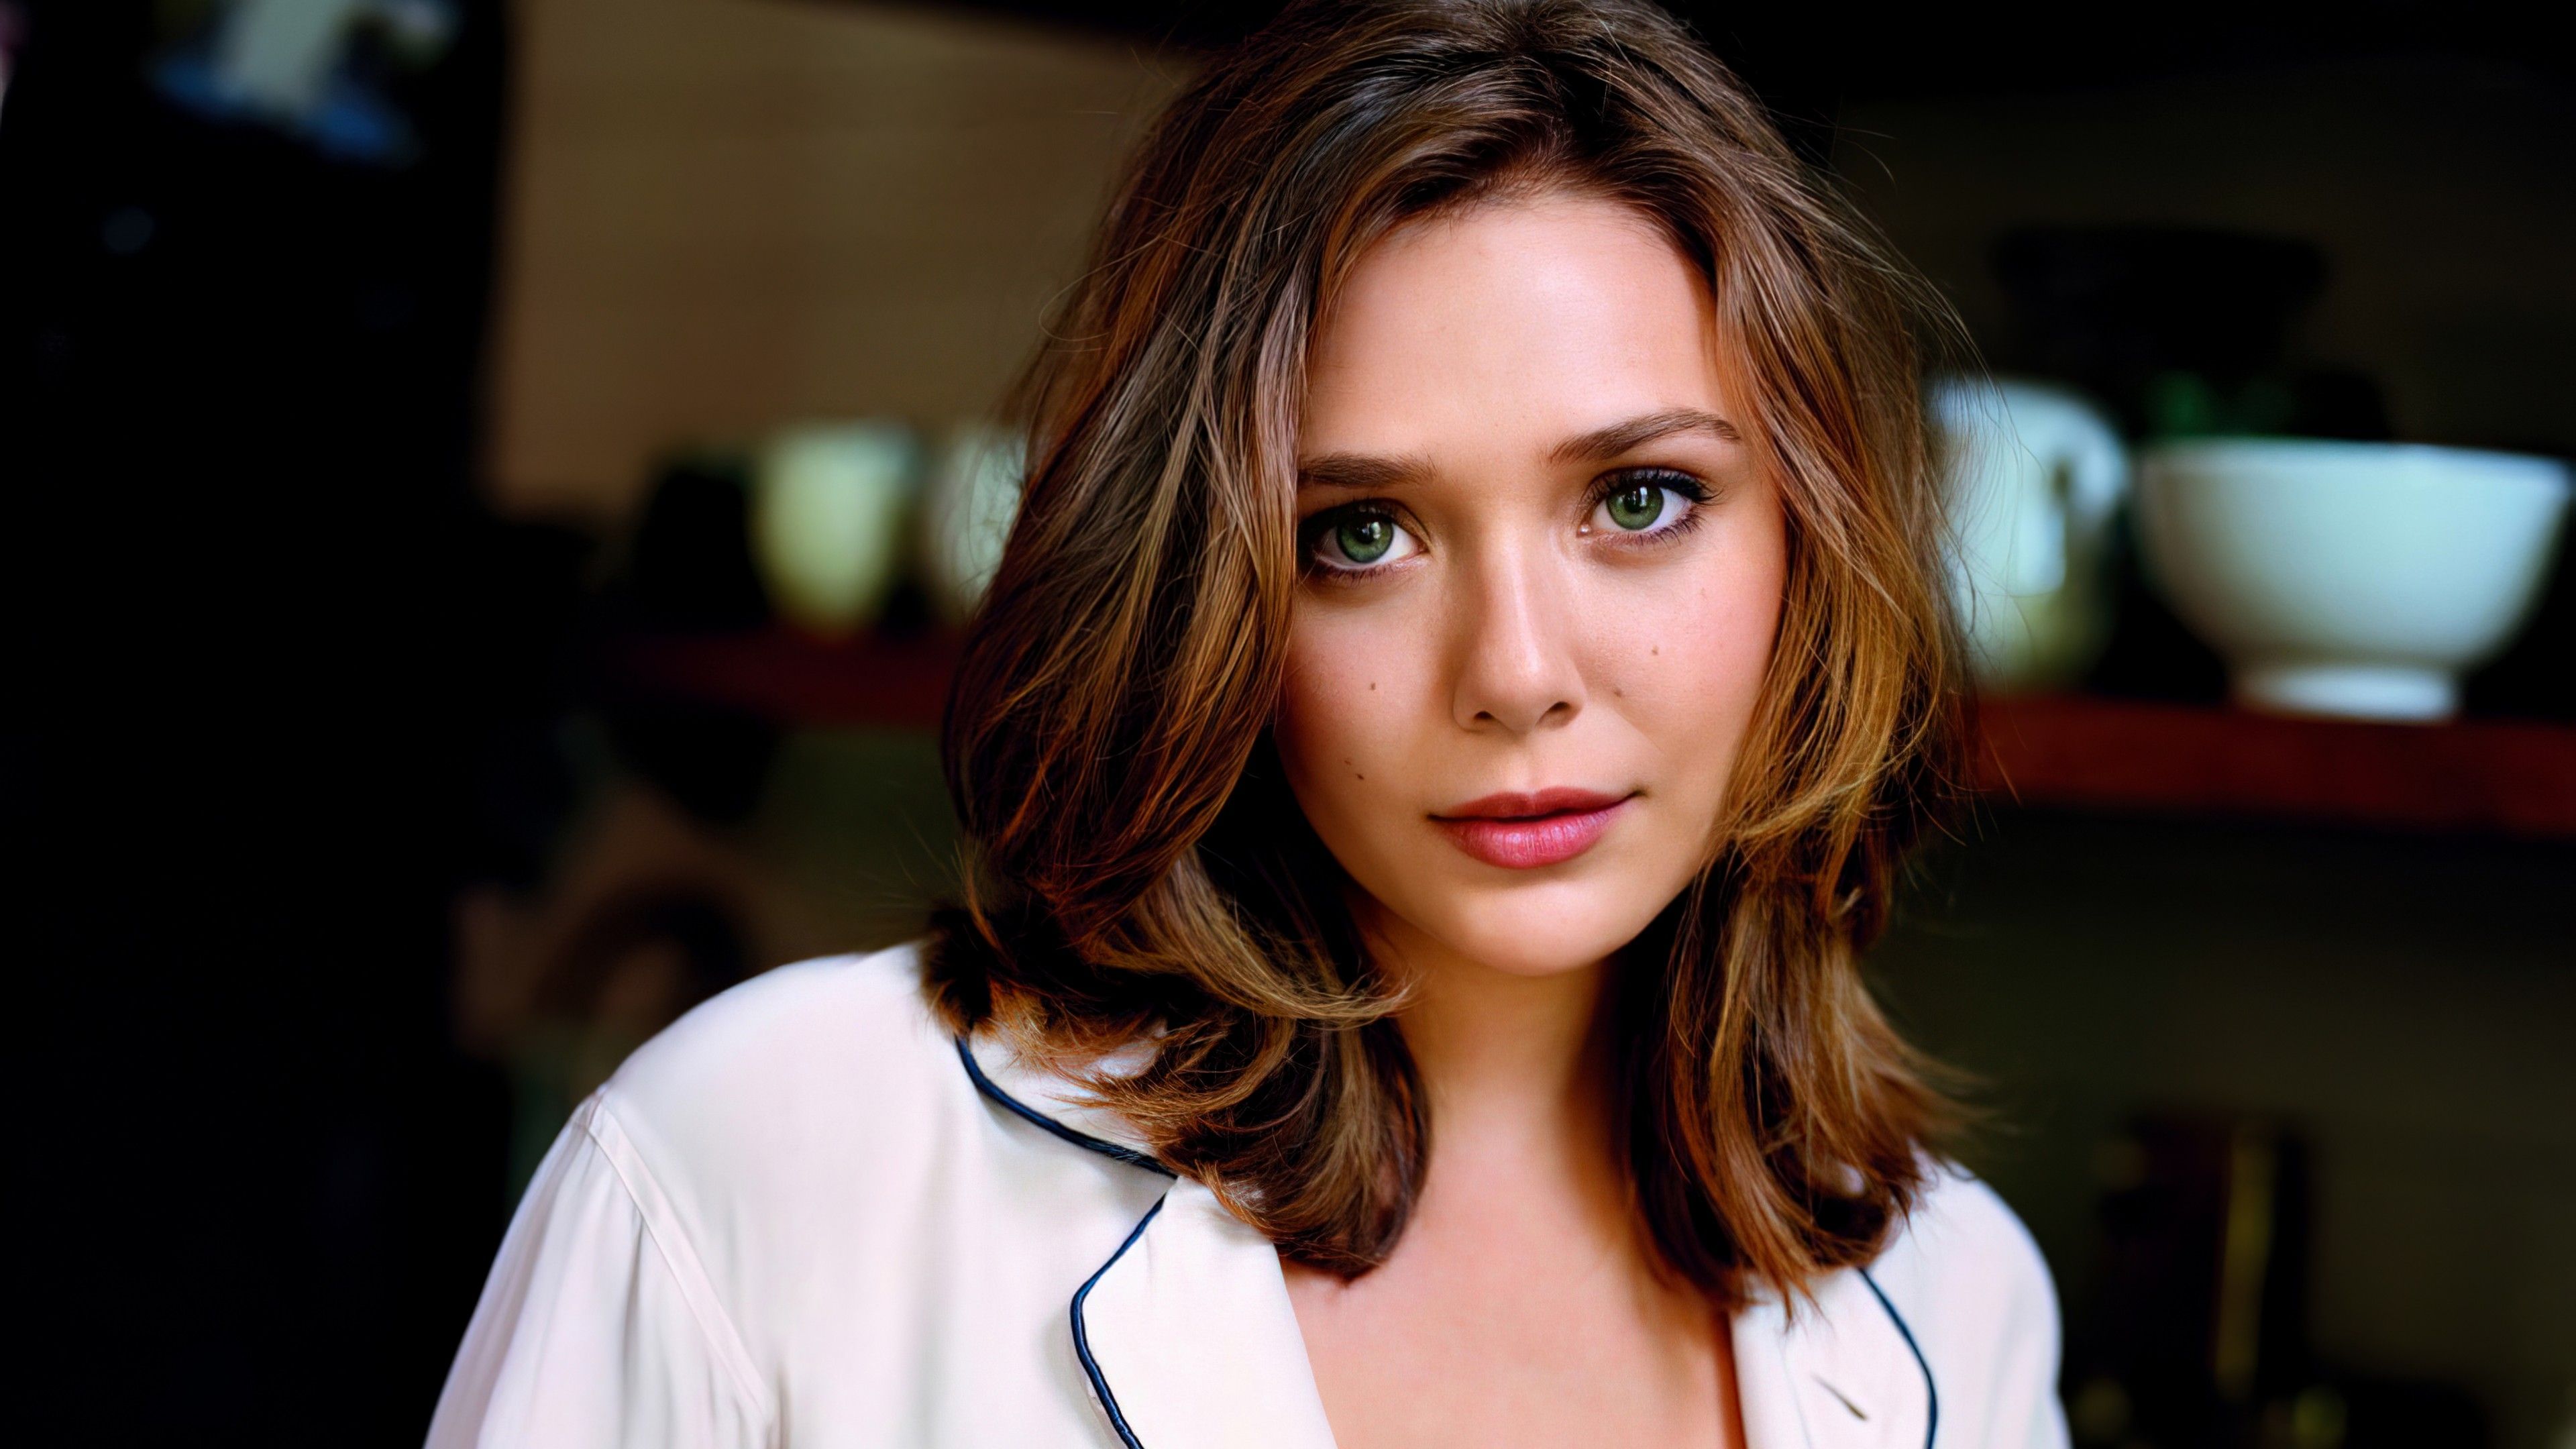 Elizabeth Olsen Hd 4k Wallpapers Hd Wallpapers Id 22057 | Images and ...